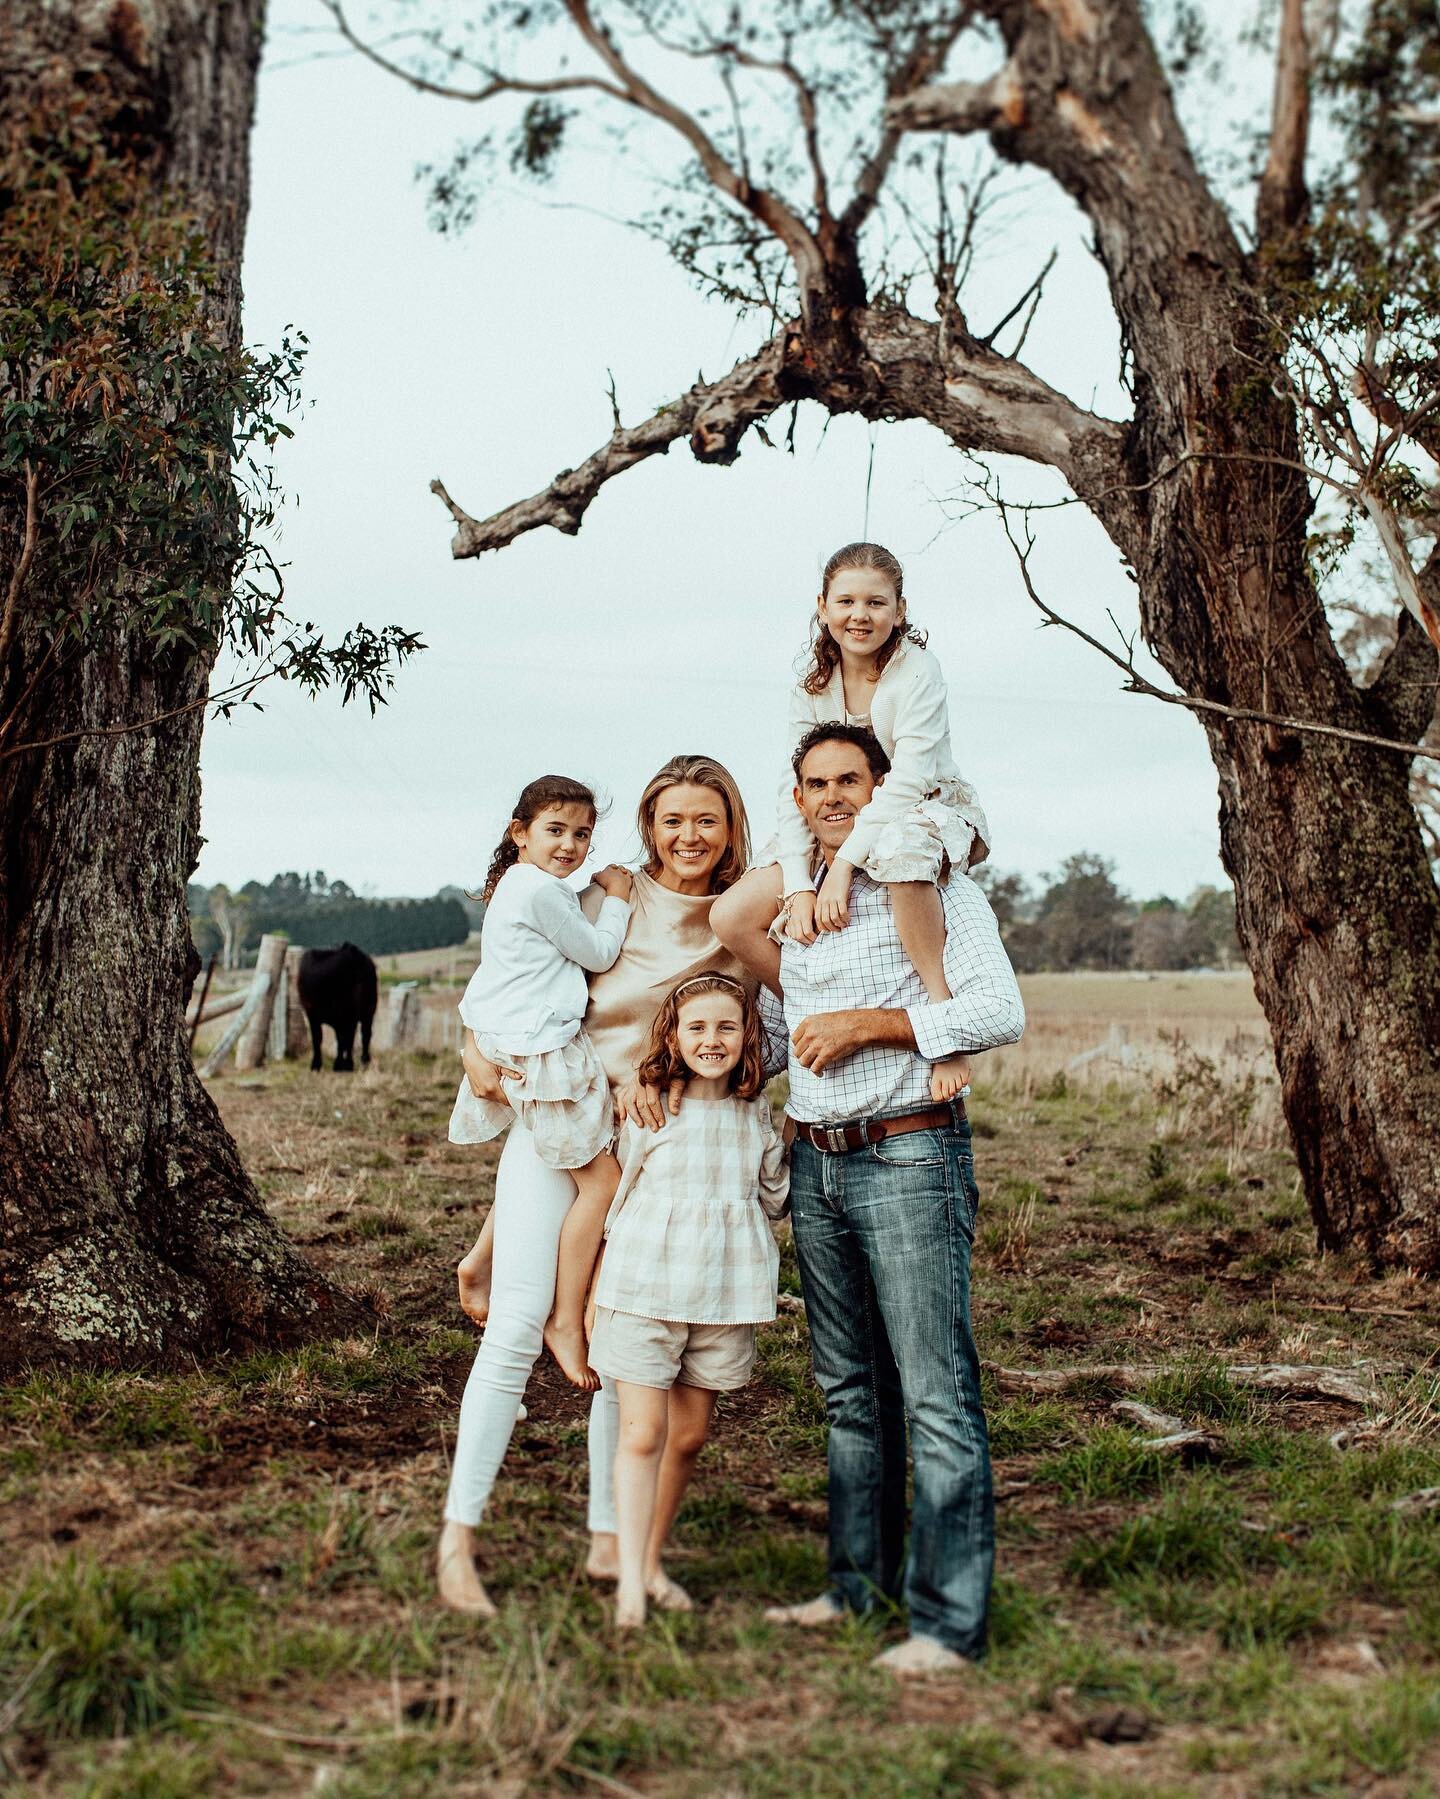 The Carroll Family. 

I've lost count of the amount of times I've photographed this beautiful family. Thank you for booking in with me every year to update your family photos. It truly is something so special to do over and over!

#familysession #fam